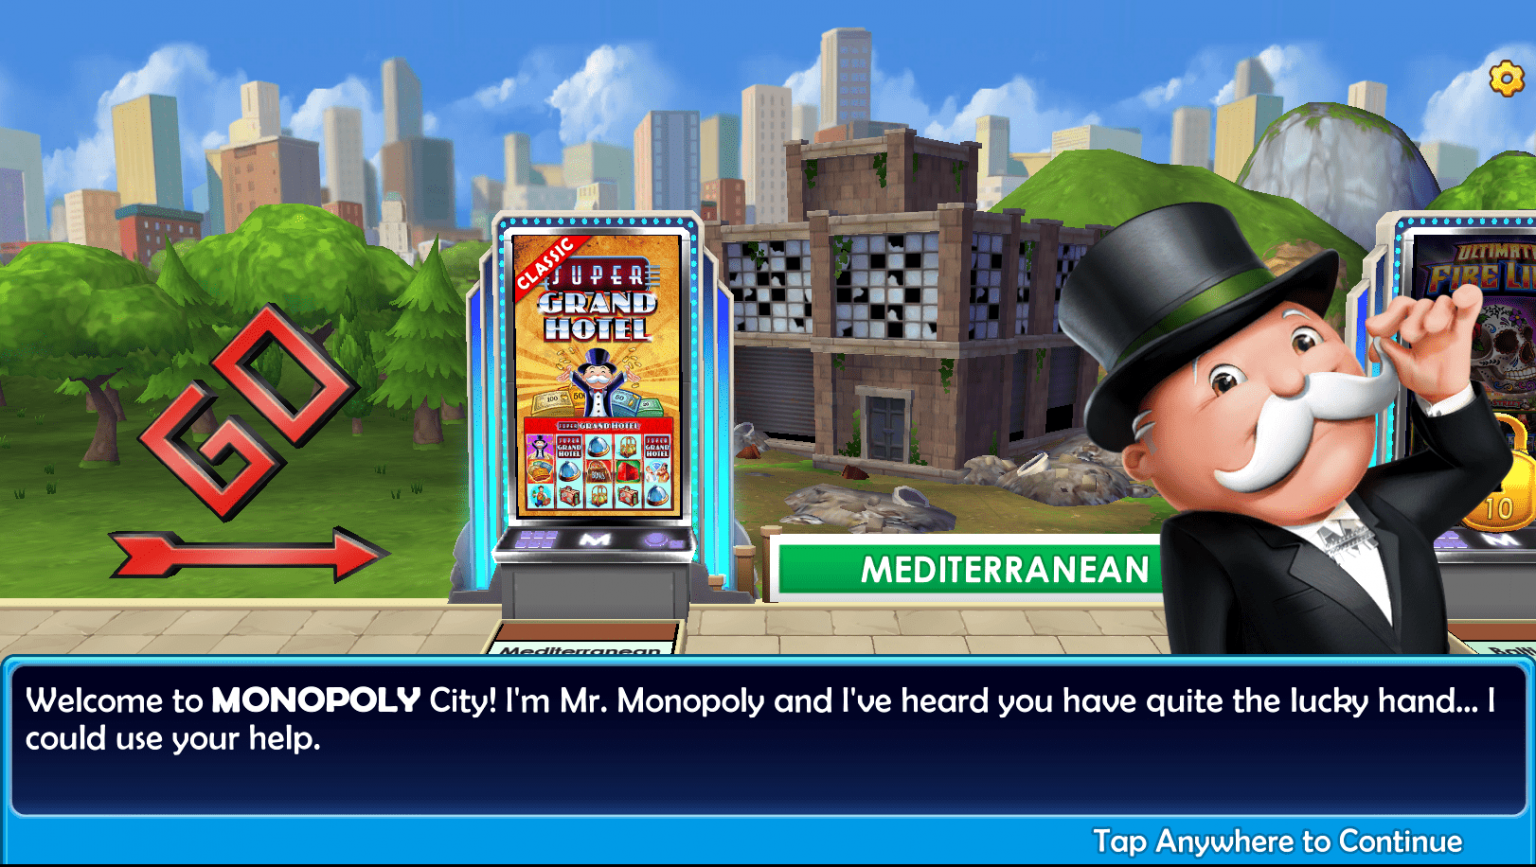 facebook monopoly slots free coins